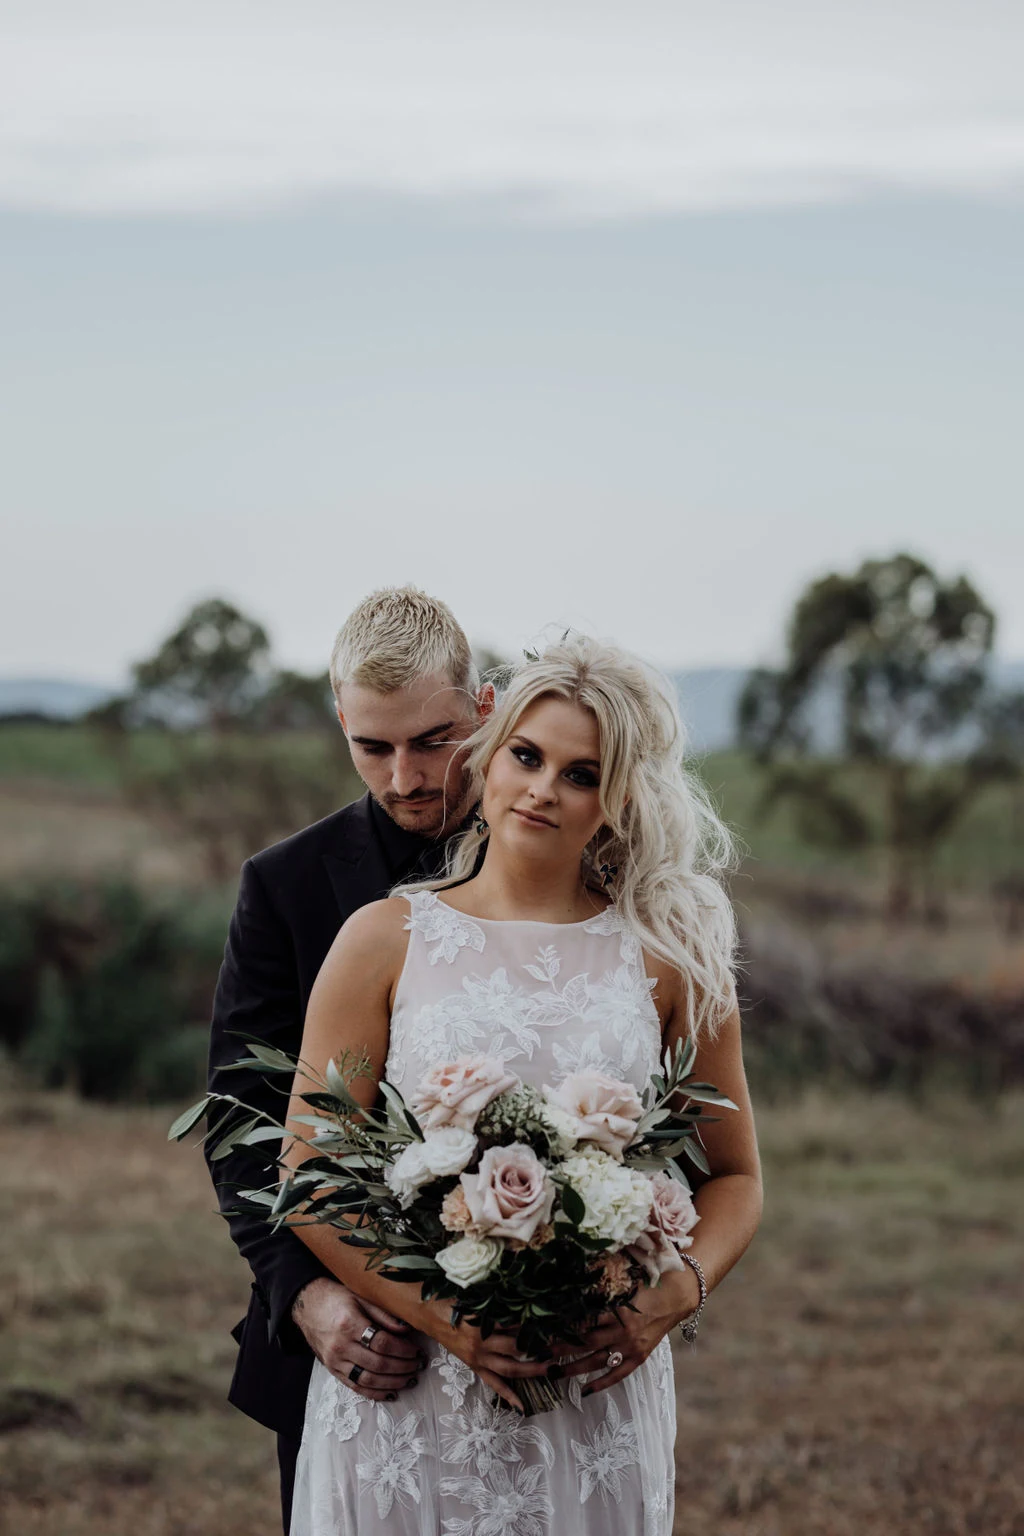 emma jade photography weddings olive view estate qld bridal gowns florals table styling cake